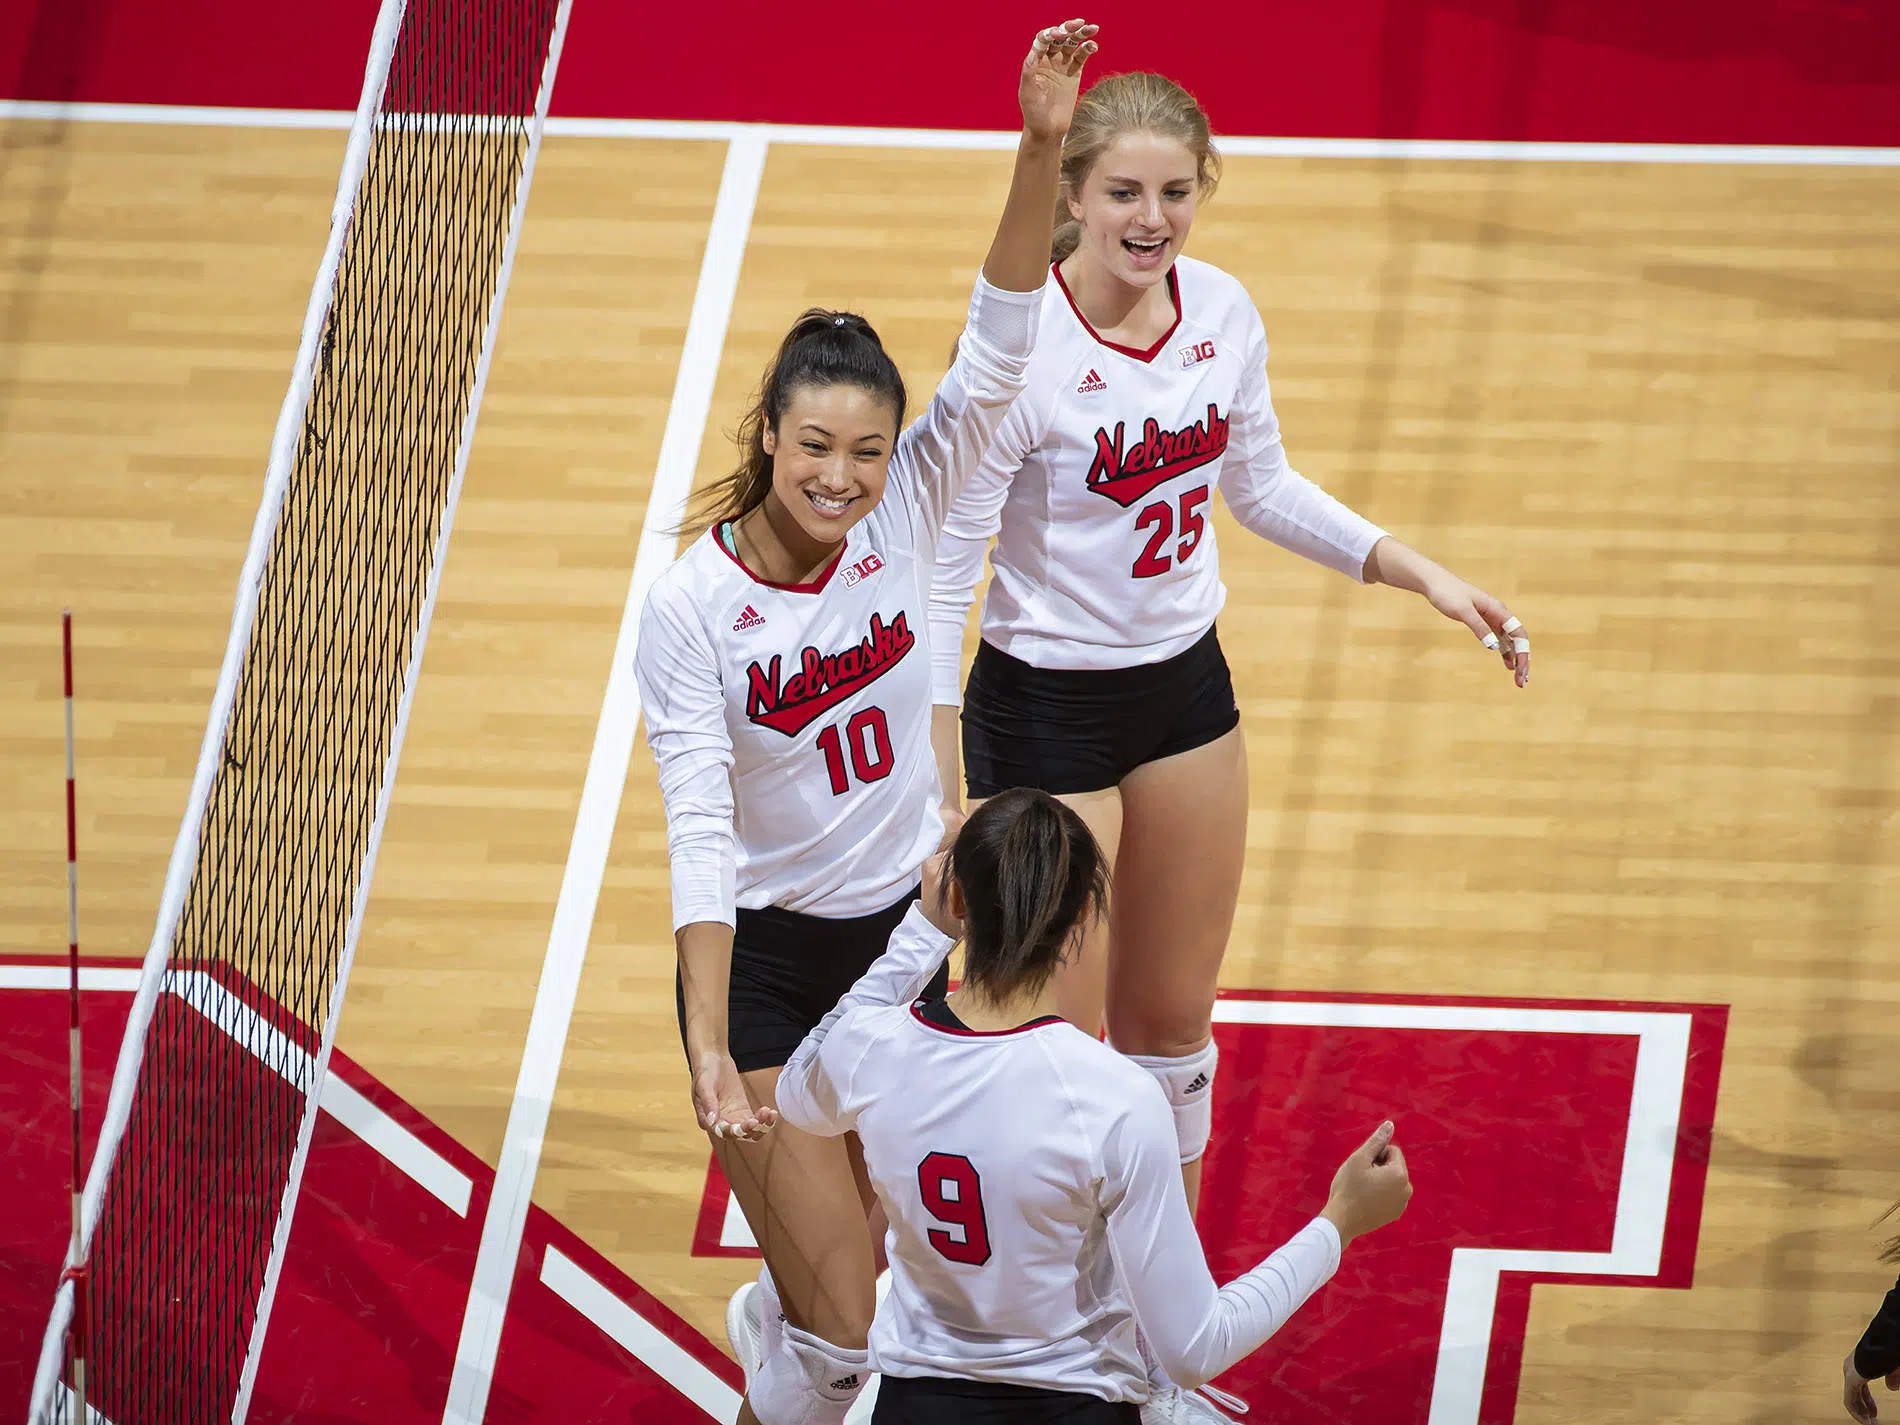 Husker volleyball ranked No. 1 ahead of Stanford showdown Kbear Country